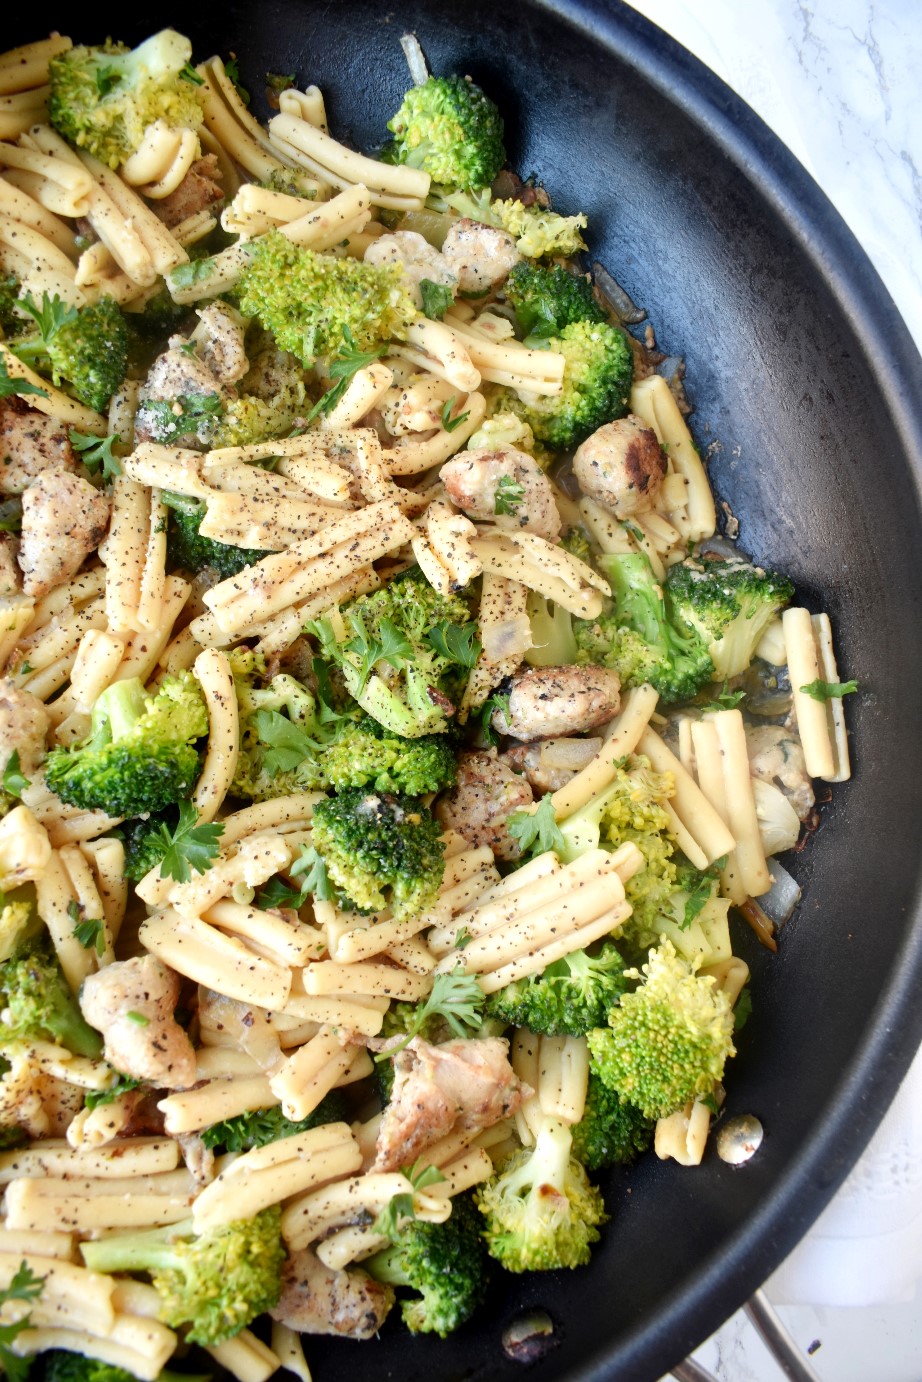 Pasta with Chicken Sausage and Broccoli